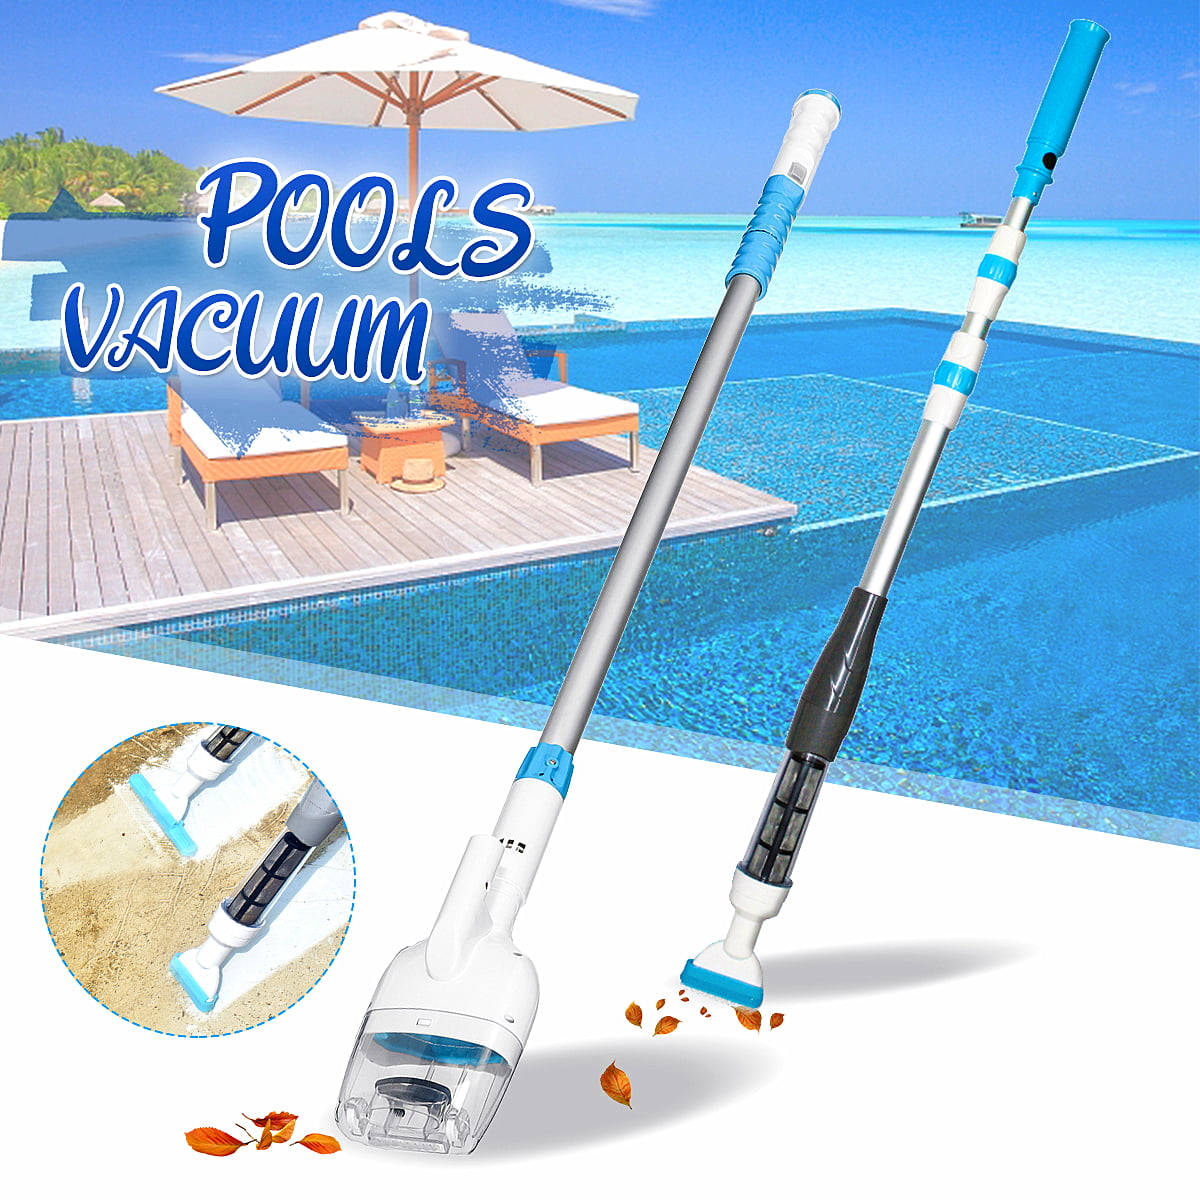 Tips for maintaining Handheld Pool Vacuum Cleaner